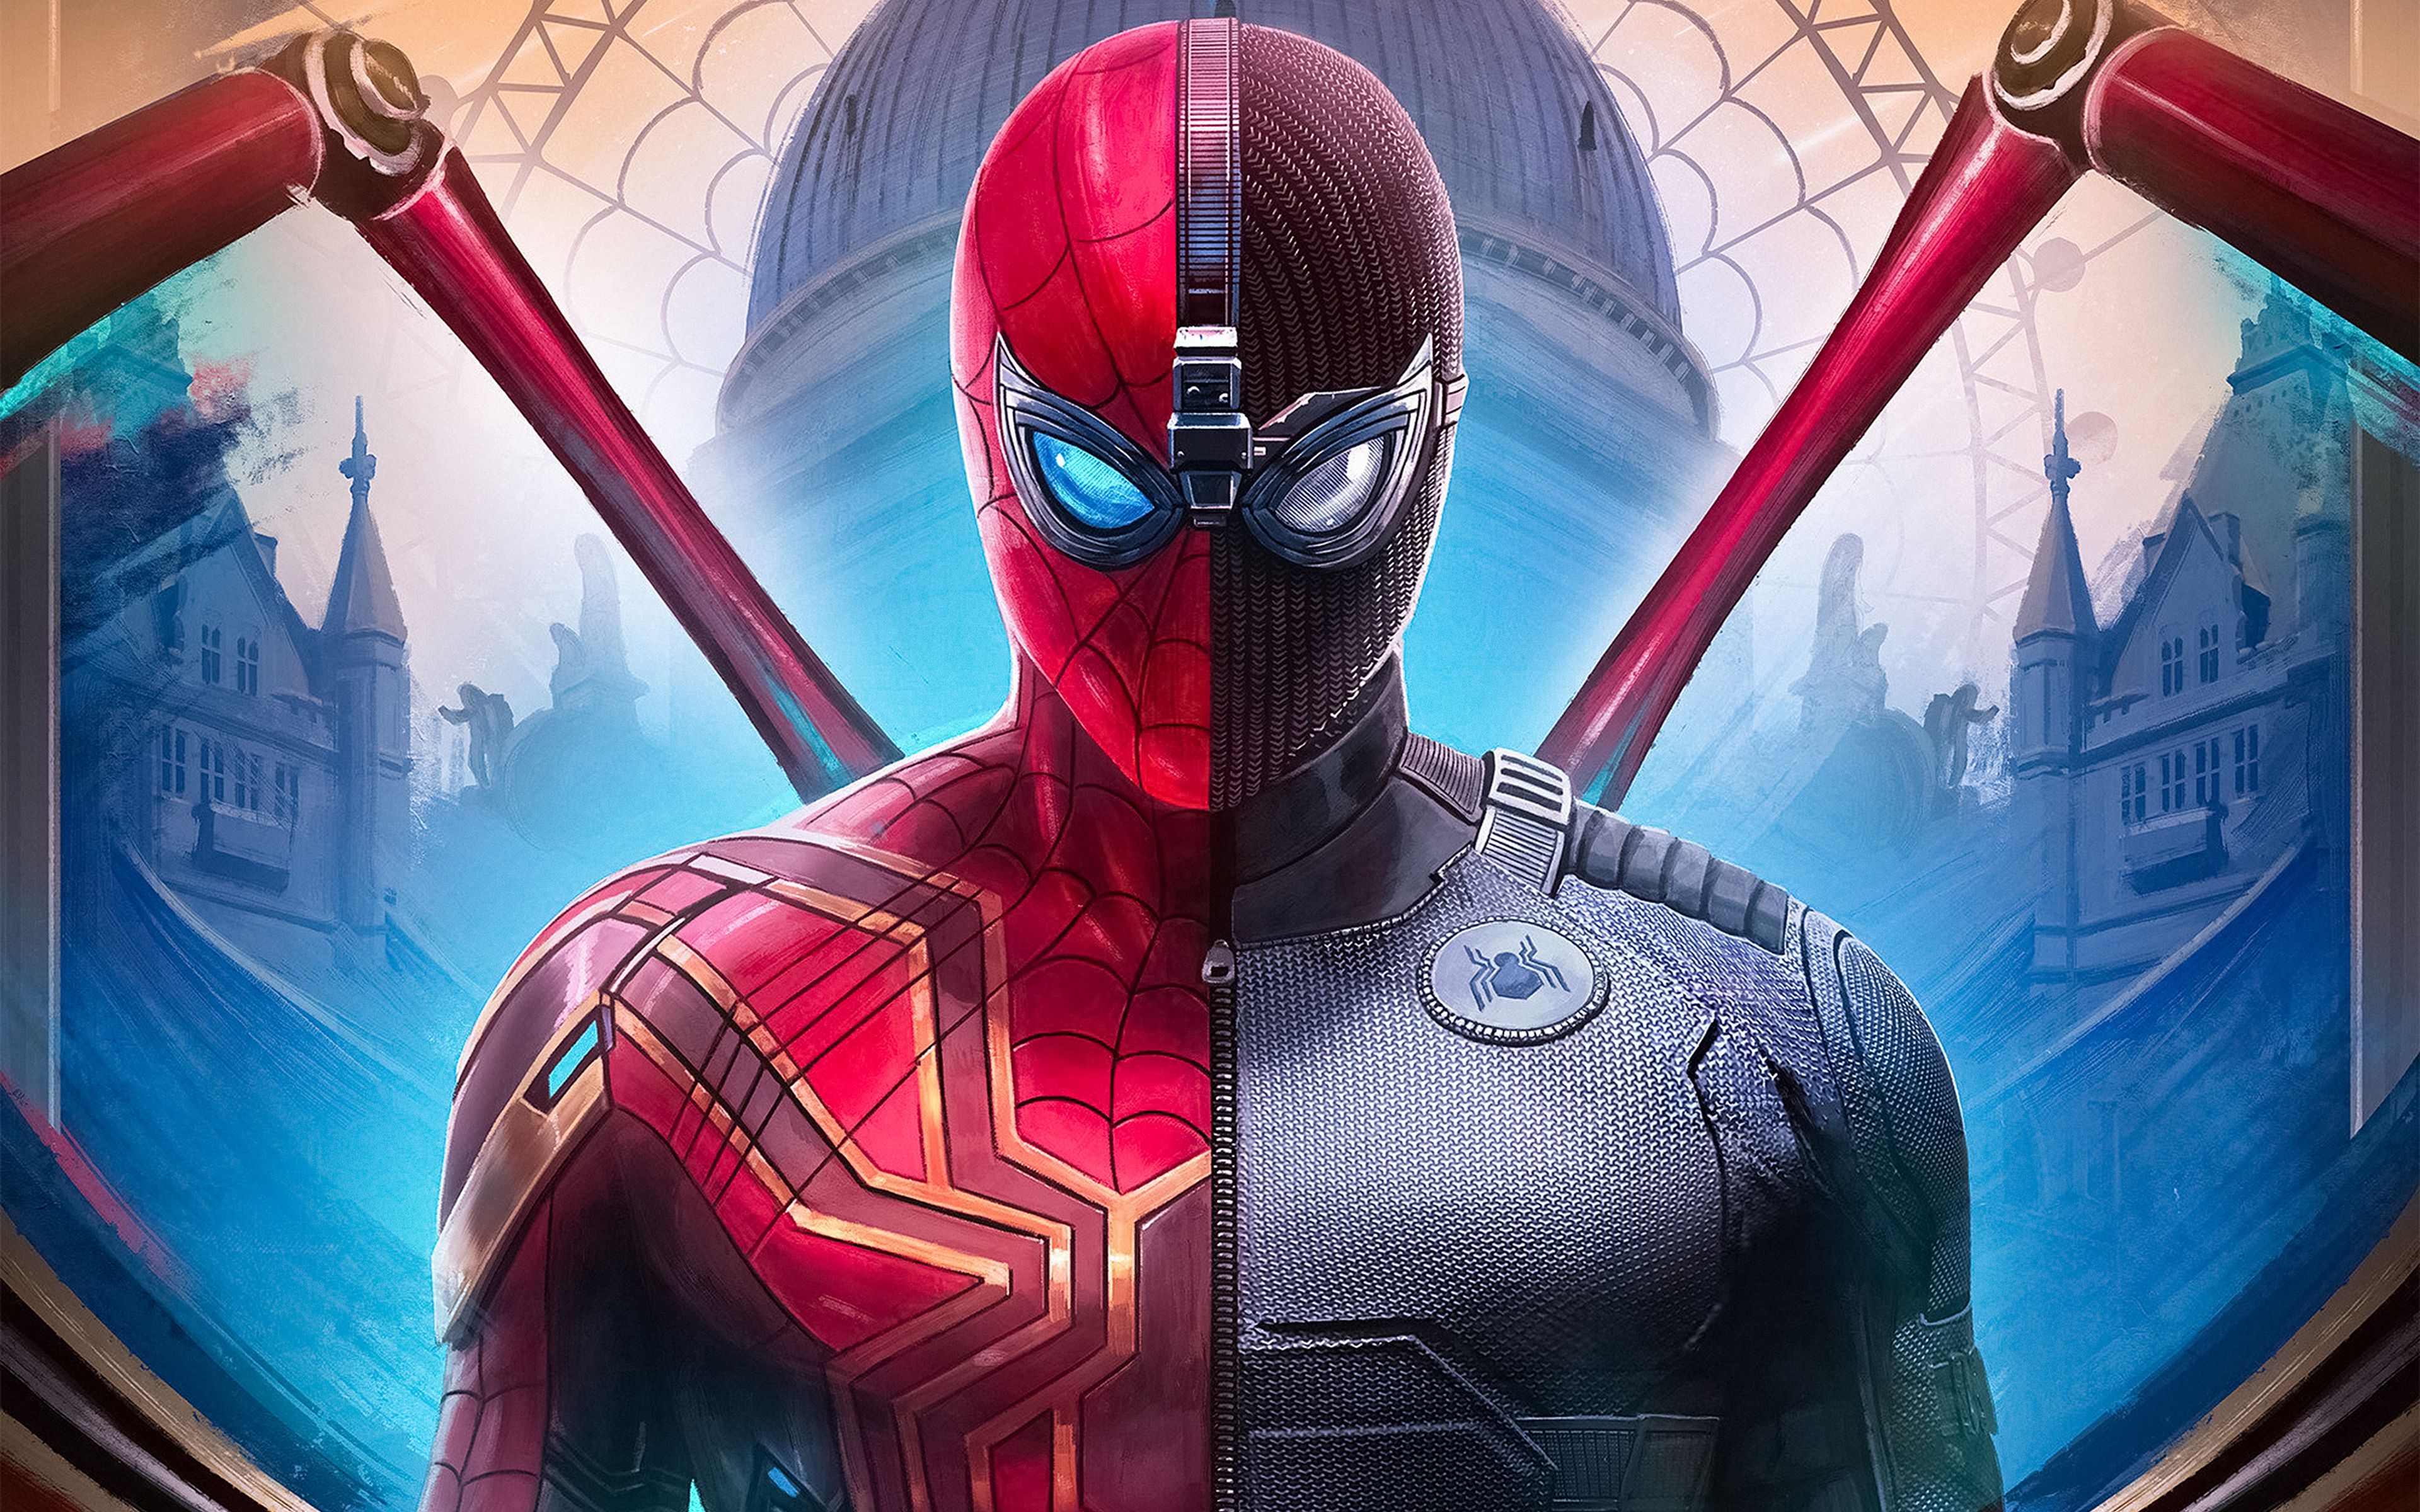 Download 3840x2400 Wallpaper 2019 Movie, Spider Man: Far From Home, Iron Spider, Stealth Suit, Face Off, 4k, Ultra HD 16: Widescreen, 3840x2400 HD Image, Background, 22444